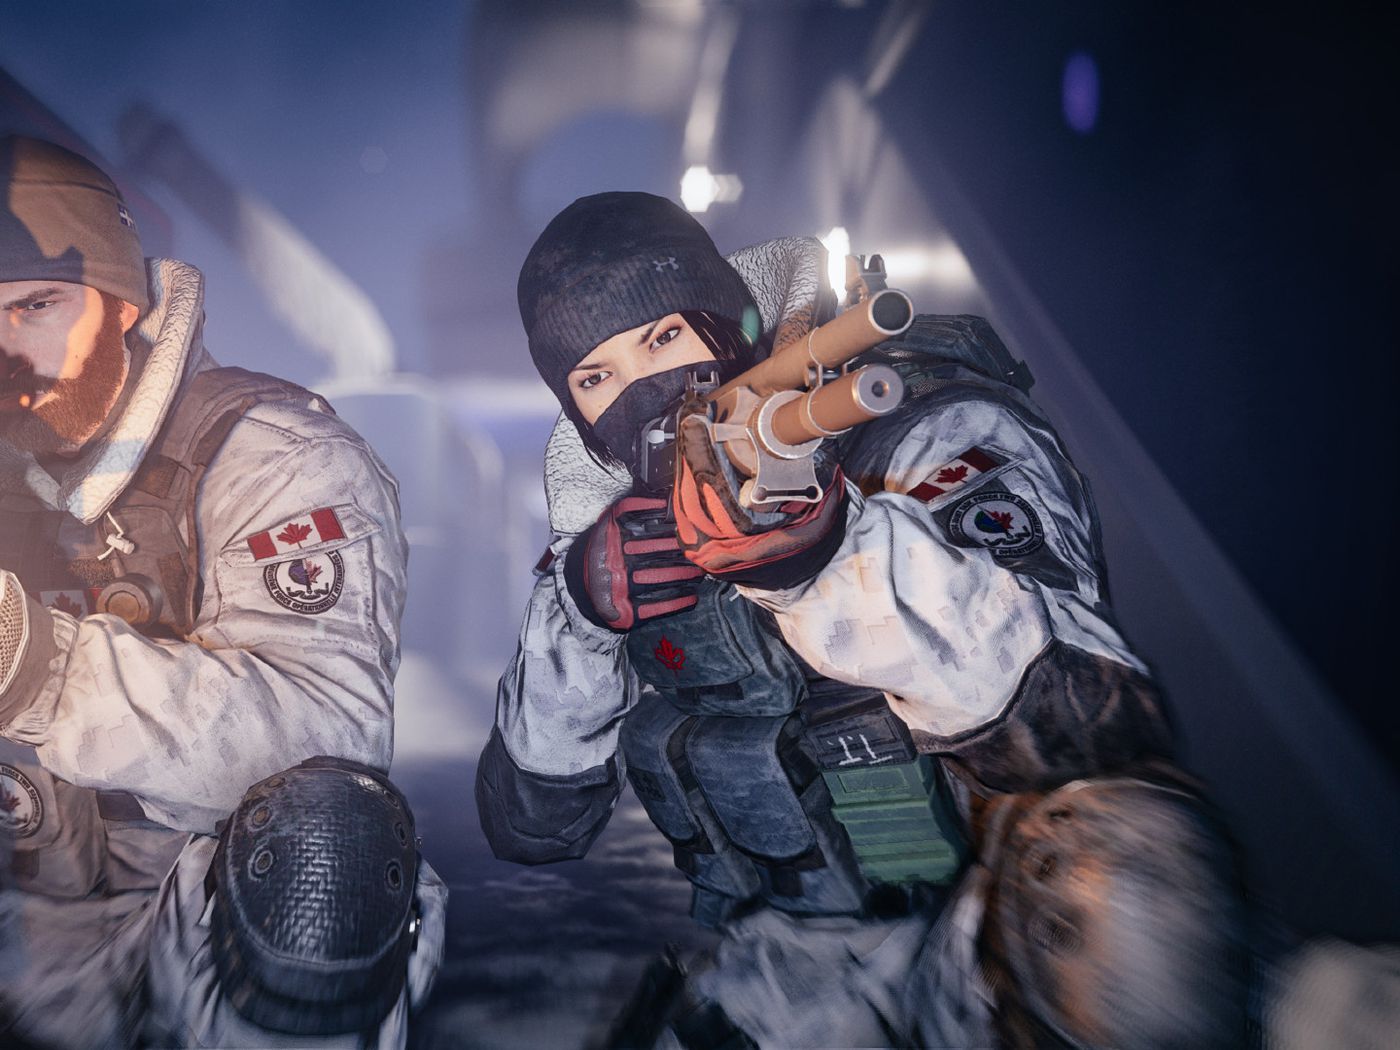 Play Rainbow Six Siege for free this weekend